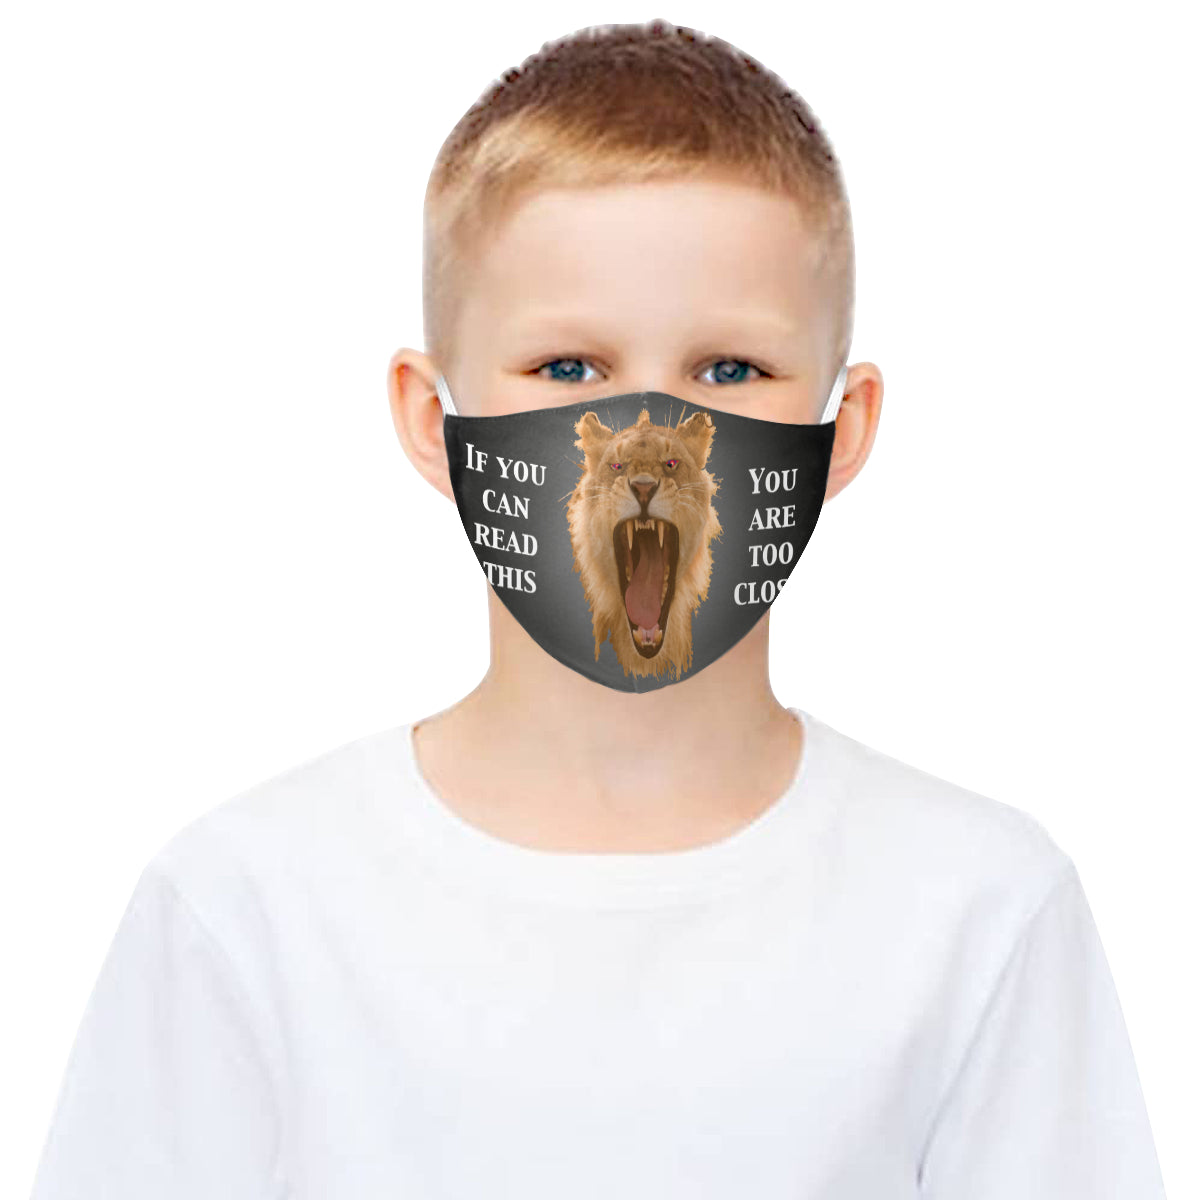 You are too close, Roar! Cotton Fabric Face Mask with Filter Slot & Adjustable Strap (Pack of 5) - Non-medical use